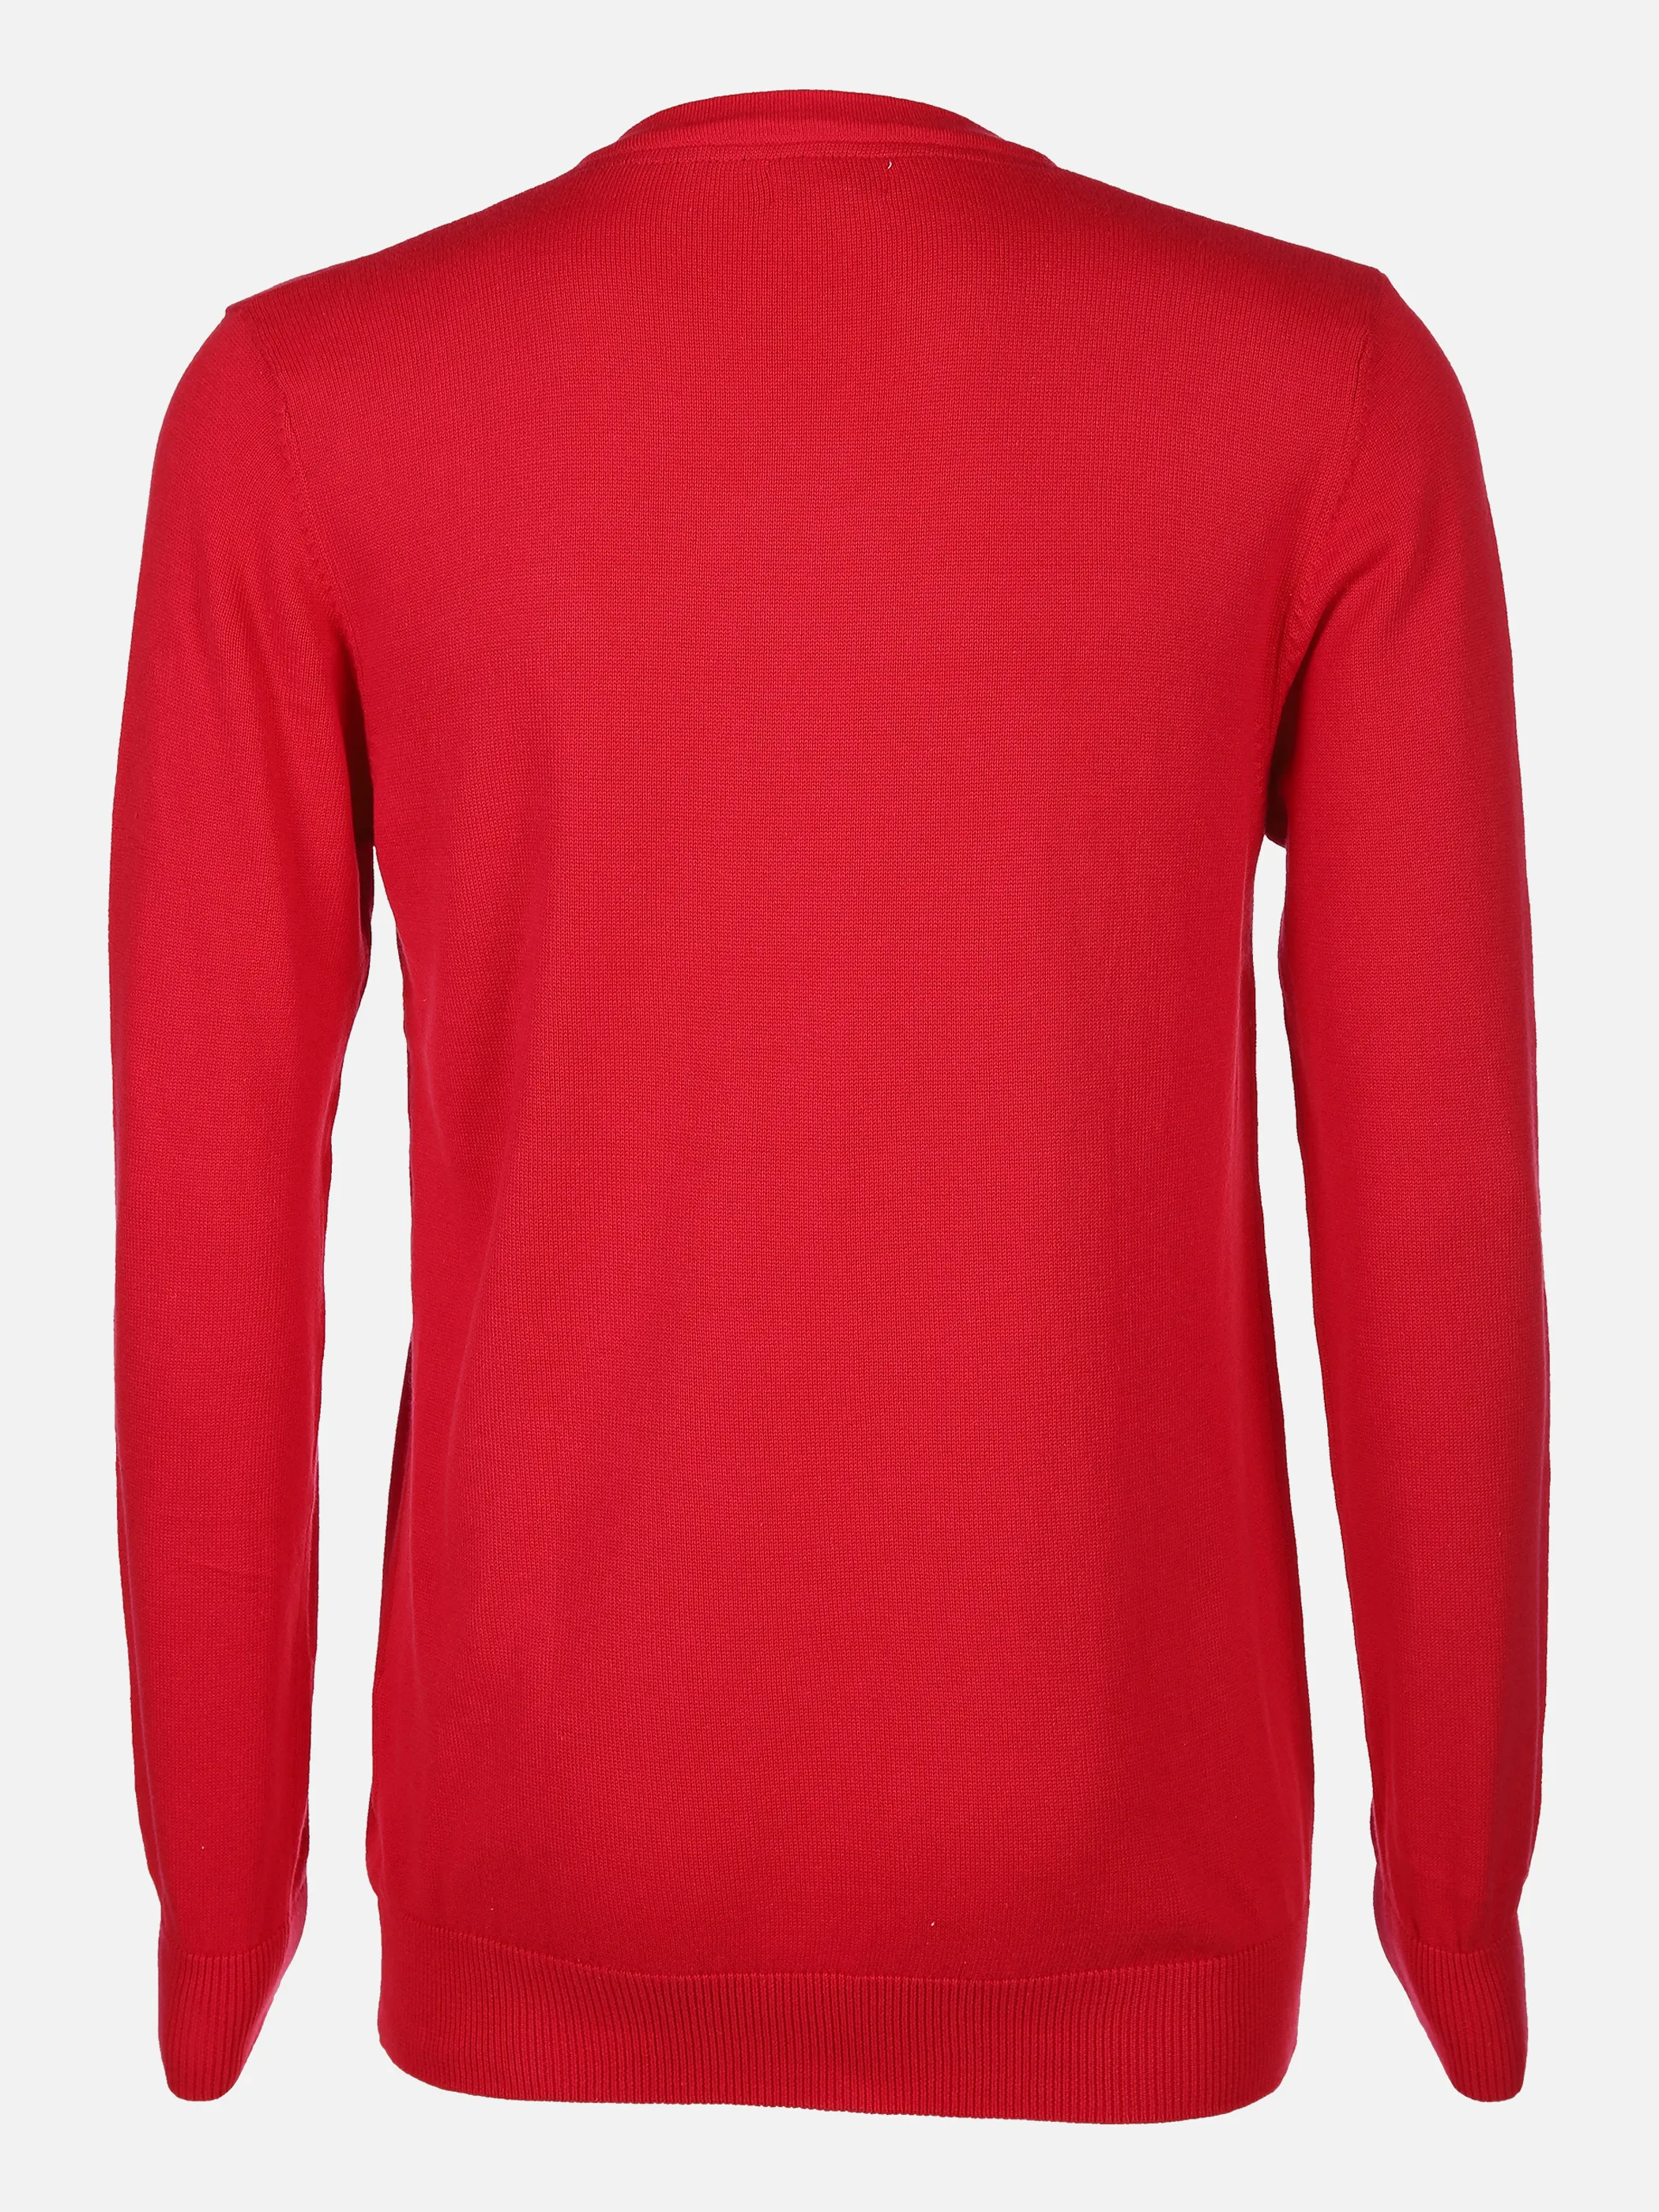 U.S. Polo Assn. He. Pullover U.S. Polo V-Neck Rot 799159 RED 2